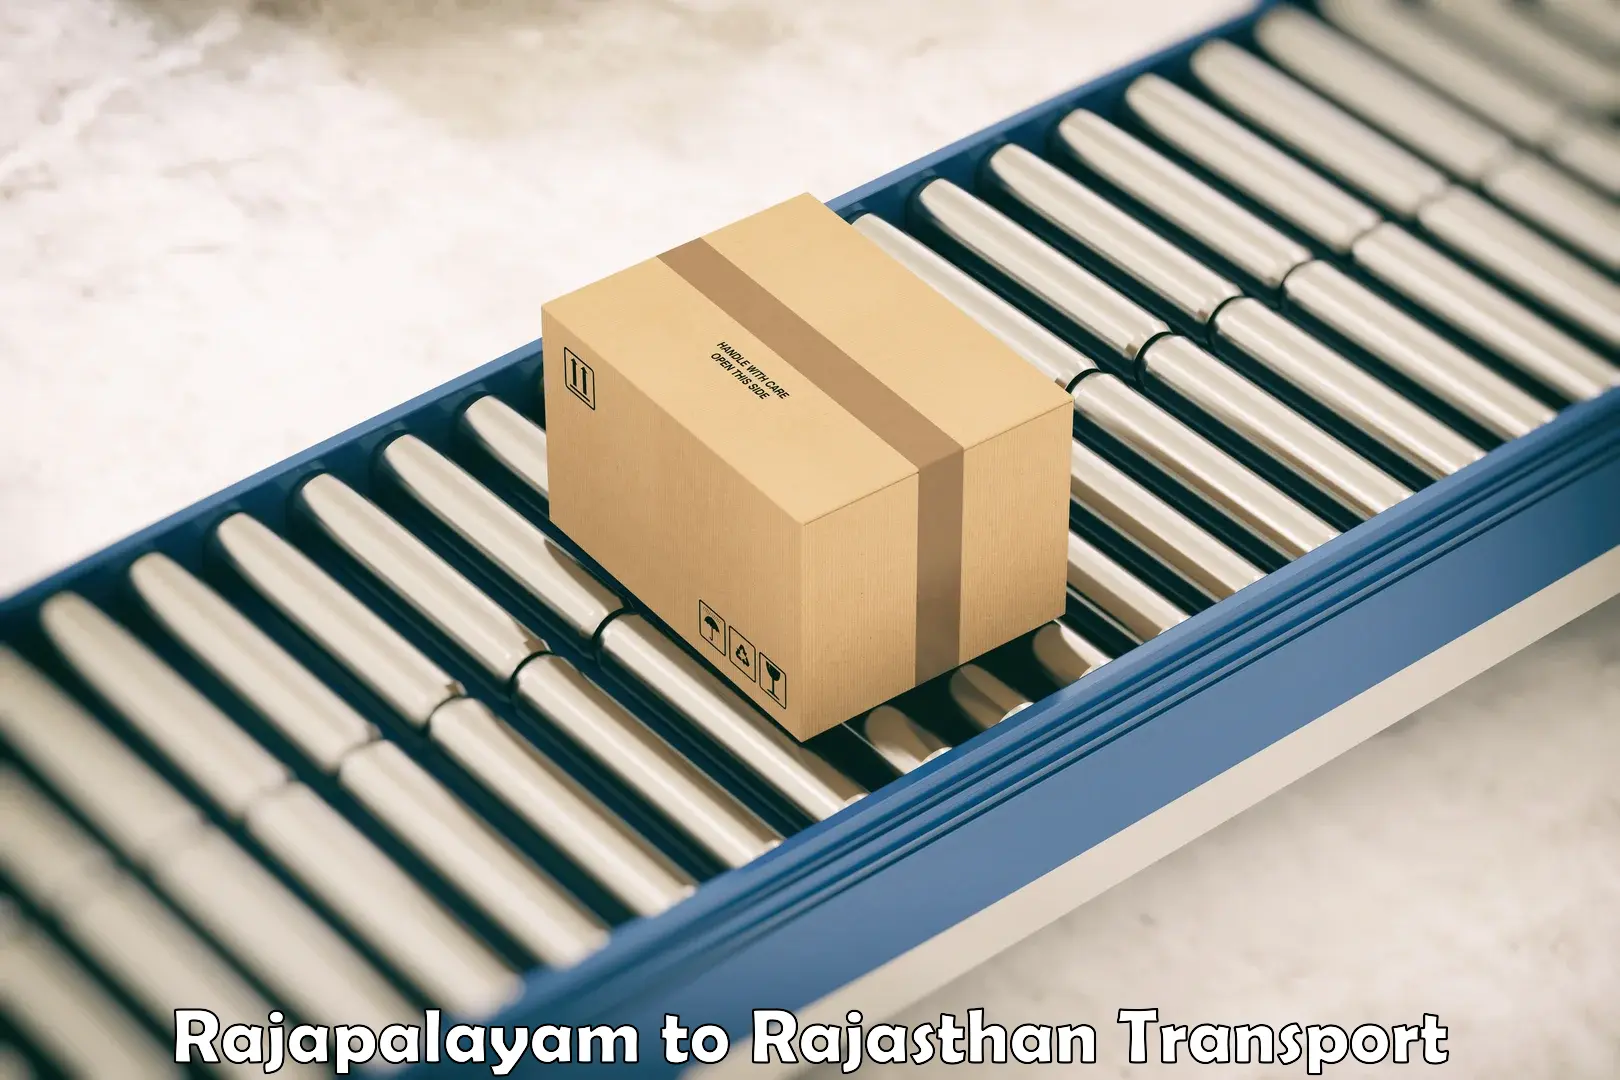 Daily parcel service transport in Rajapalayam to Rajasthan